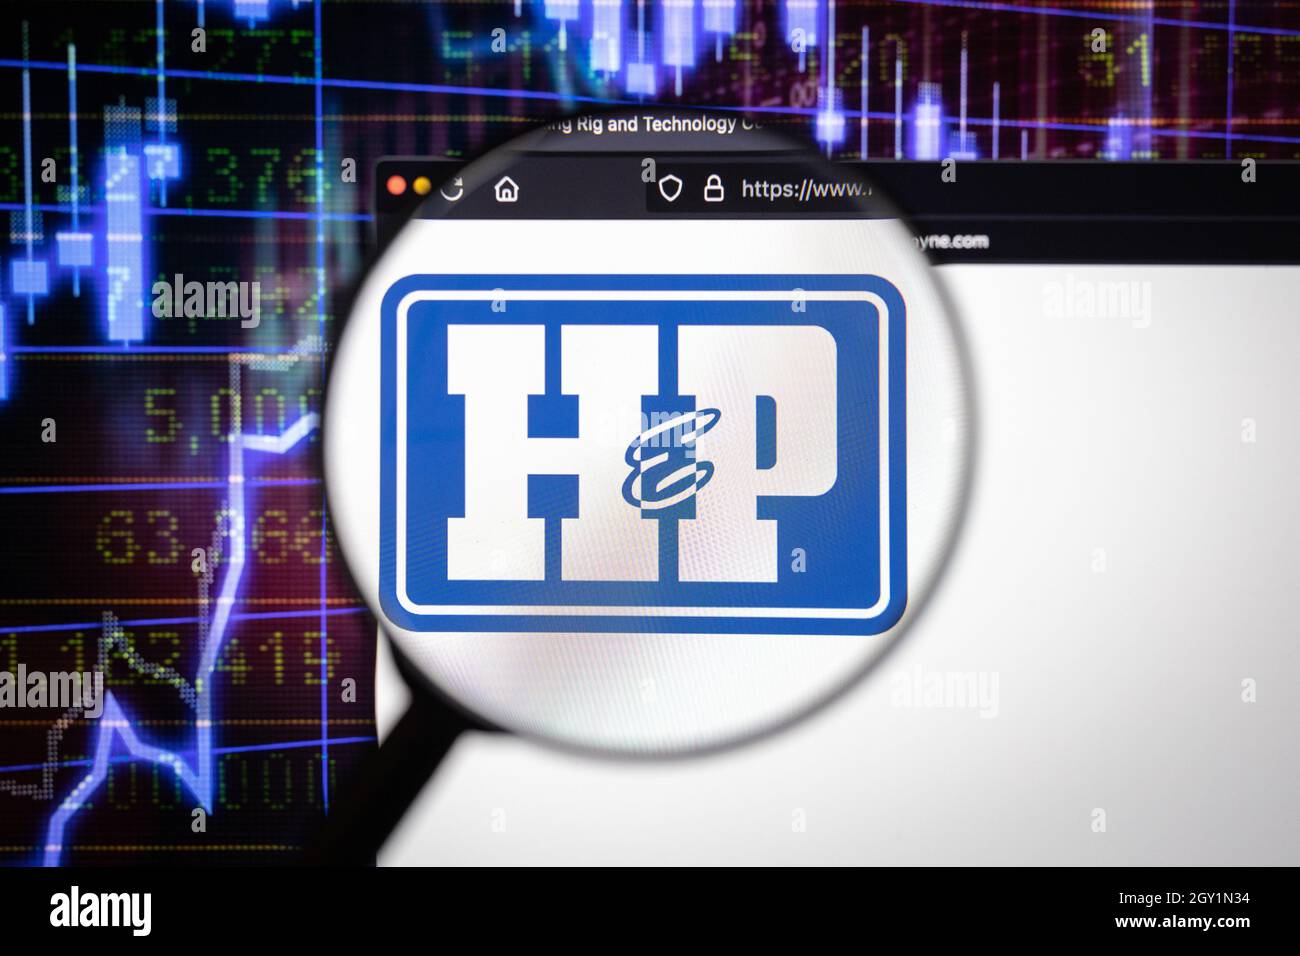 Helmerich and Payne company logo on a website with blurry stock market developments in the background, seen on a computer screen Stock Photo